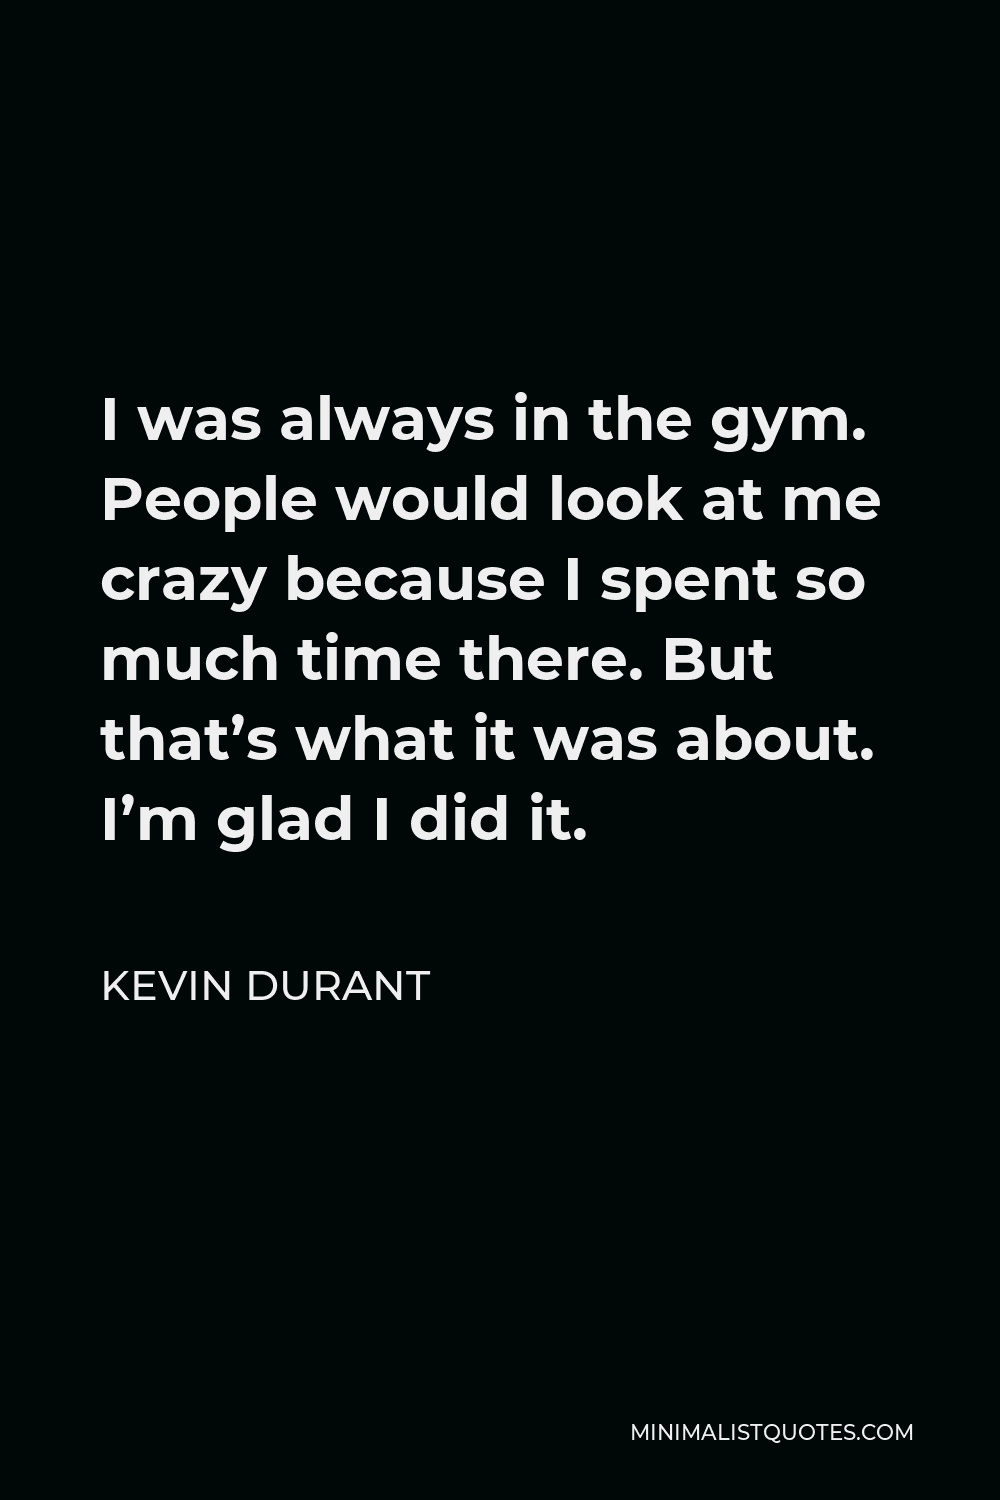 Kevin Durant Quote - I was always in the gym. People would look at me crazy because I spent so much time there. But that’s what it was about. I’m glad I did it.